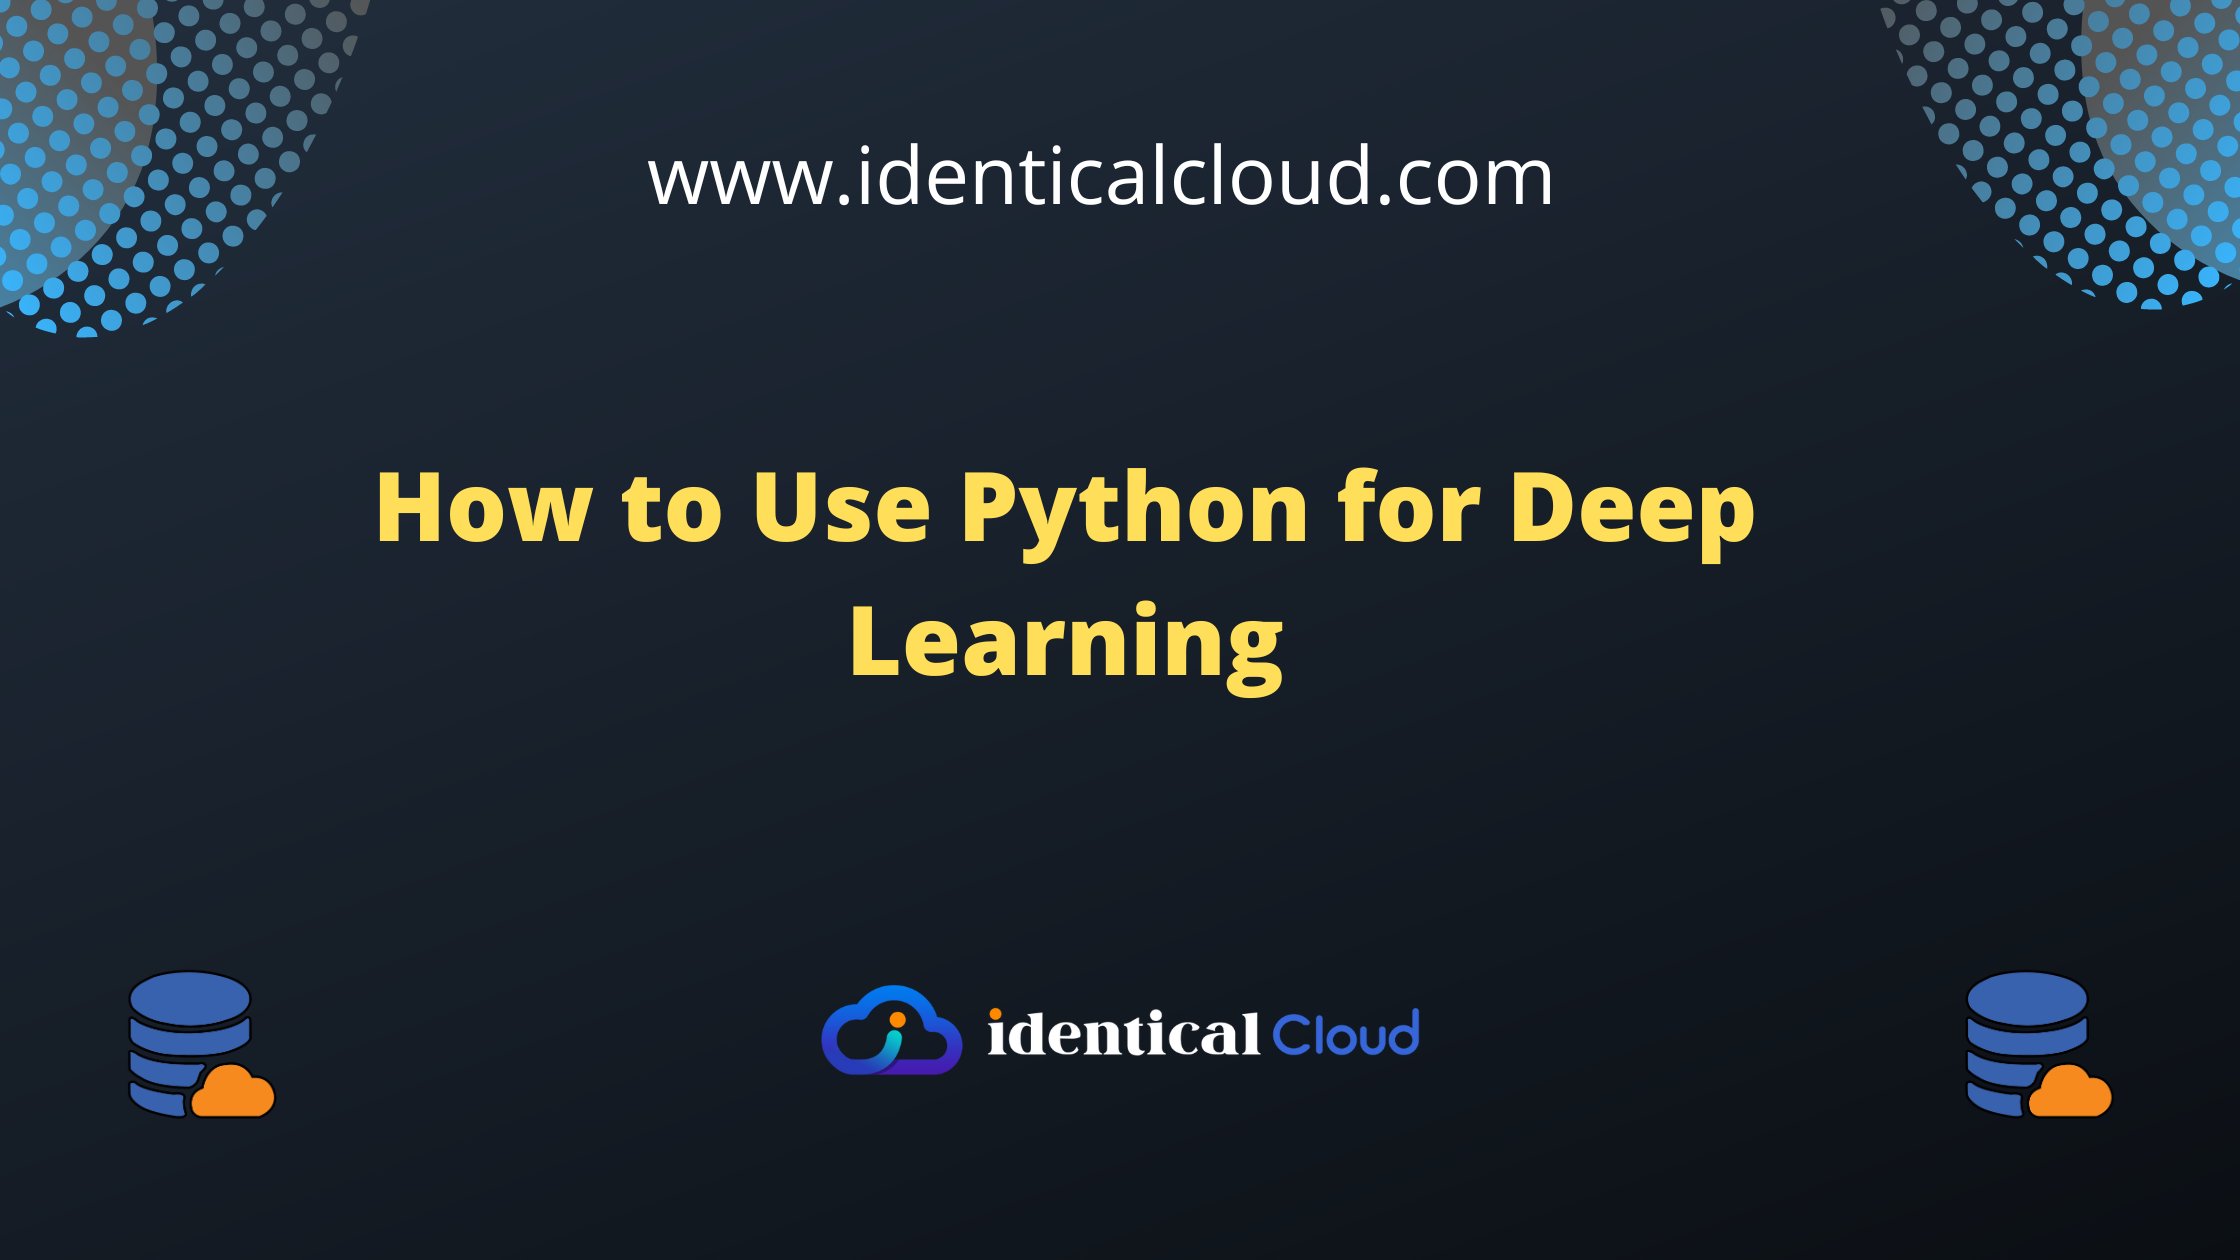 How to Use Python for Deep Learning